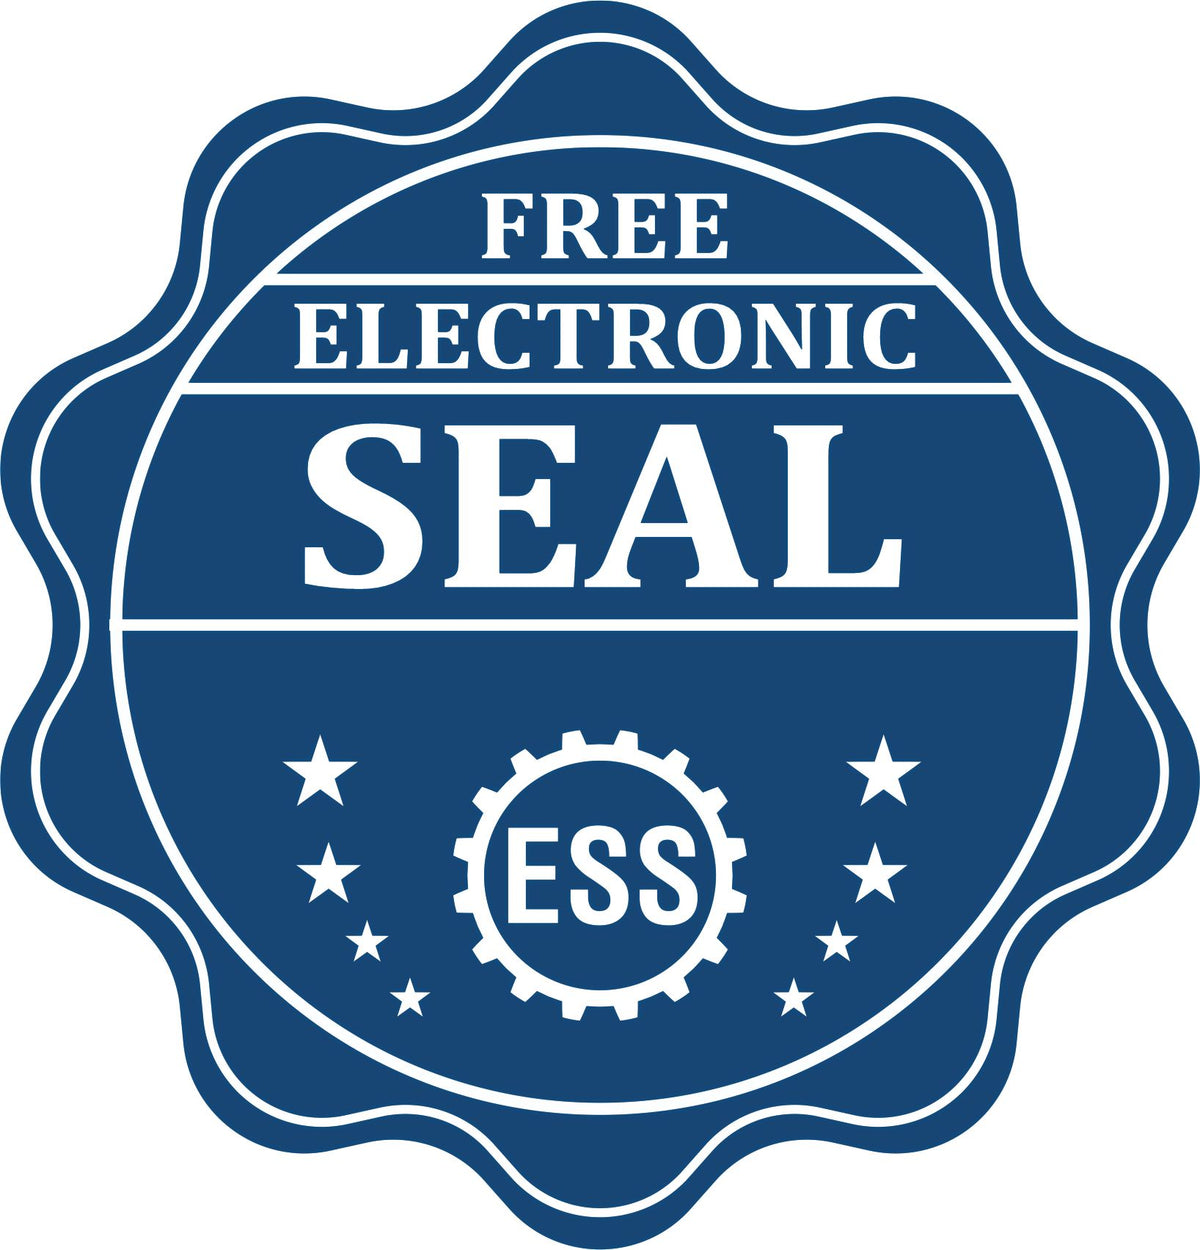 A badge showing a free electronic seal for the State of District of Columbia Extended Long Reach Geologist Seal with stars and the ESS gear on the emblem.